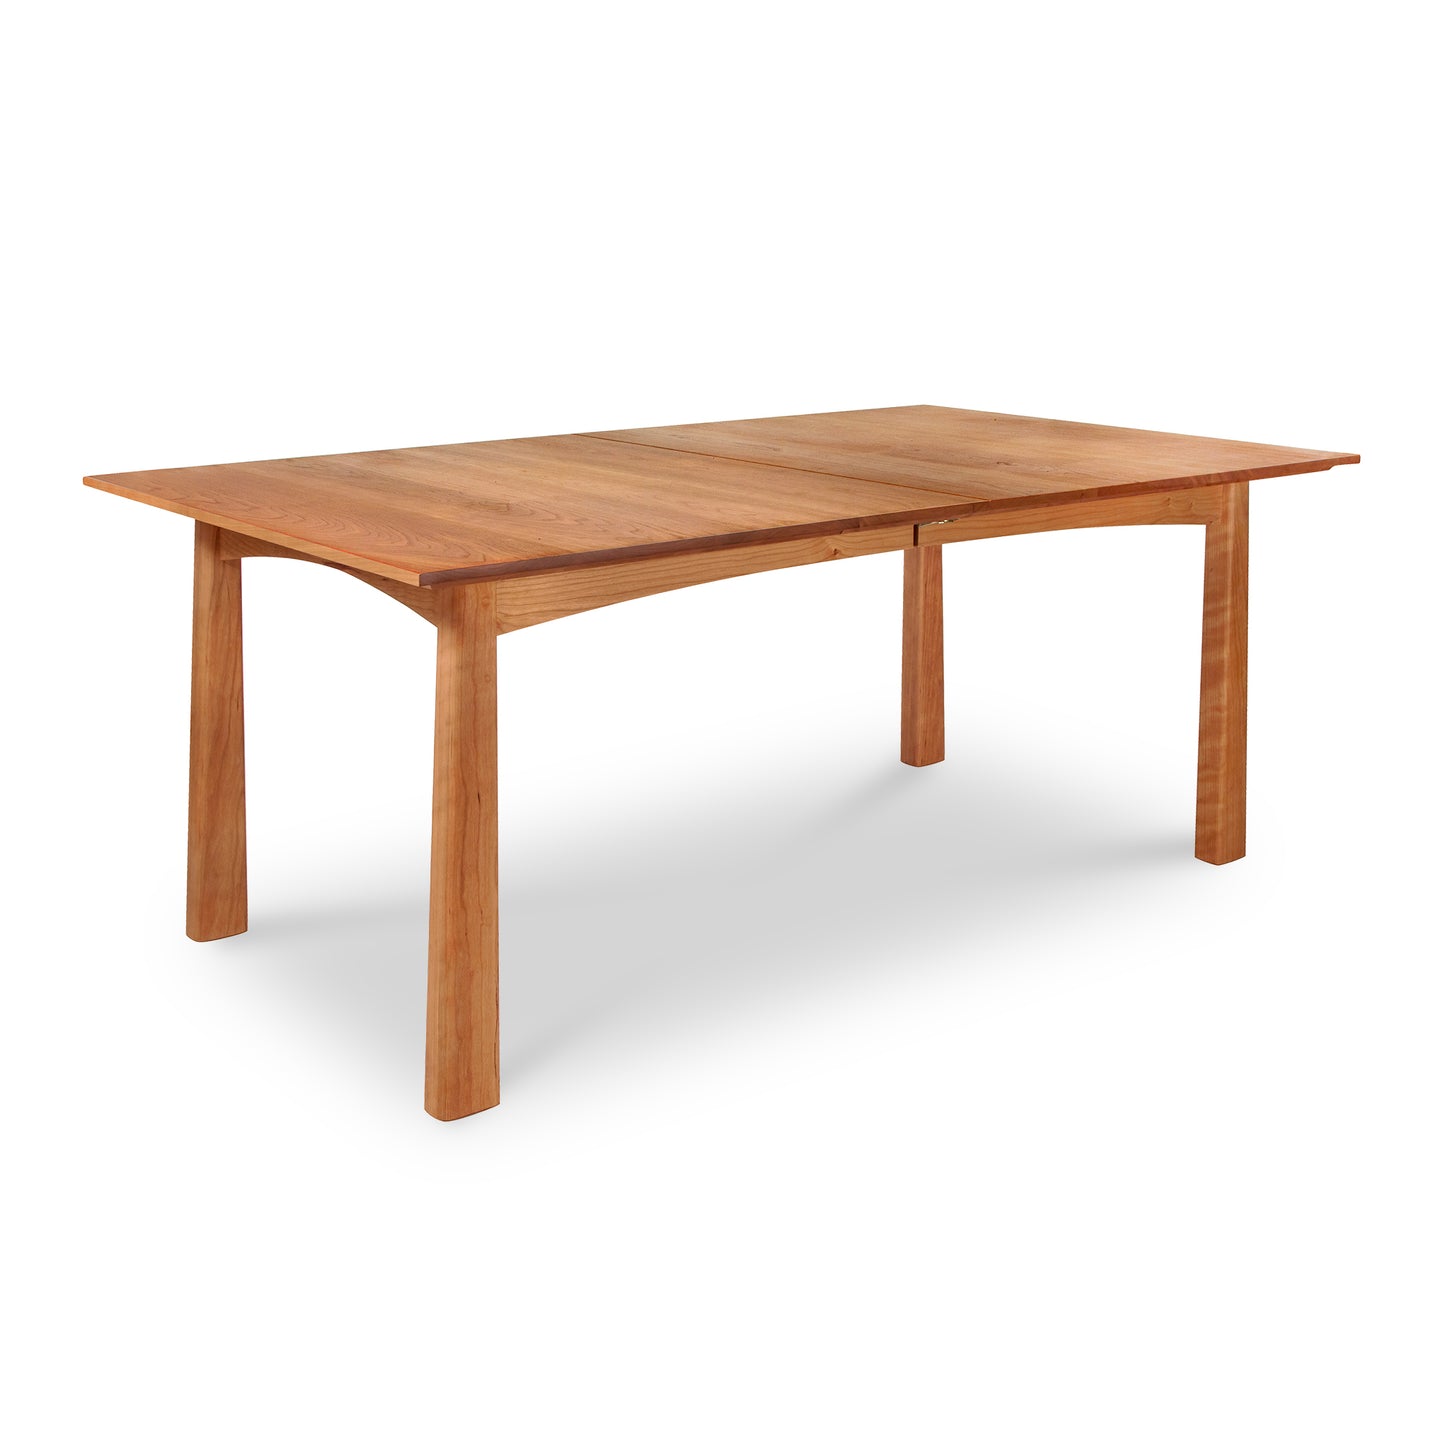 A Maple Corner Woodworks Cherry Moon Extension Dining Table with a smooth rectangular surface and four sturdy legs, capable of extension, set against a plain white background.